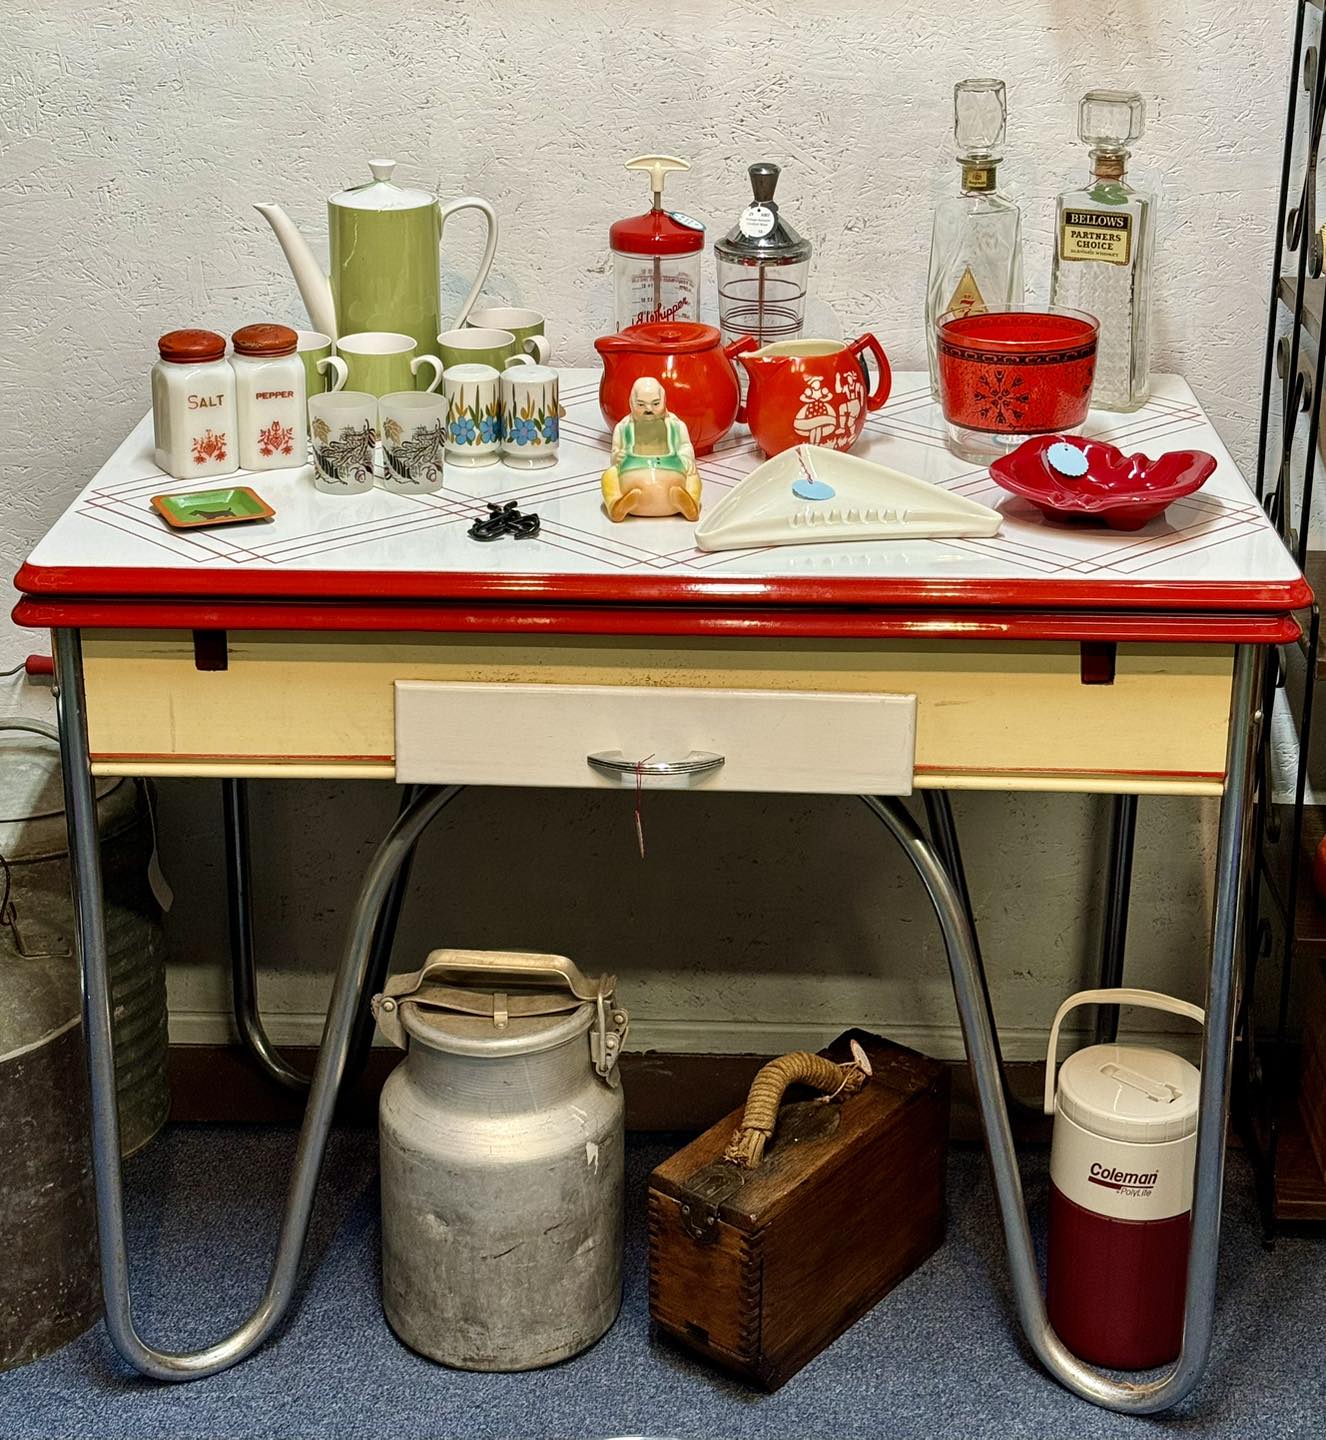 Booth 132 - Vintage Retro Metal Table Painted Red and White - Scranberry Coop - Vintage Store - Antiques, Collectibles, & More